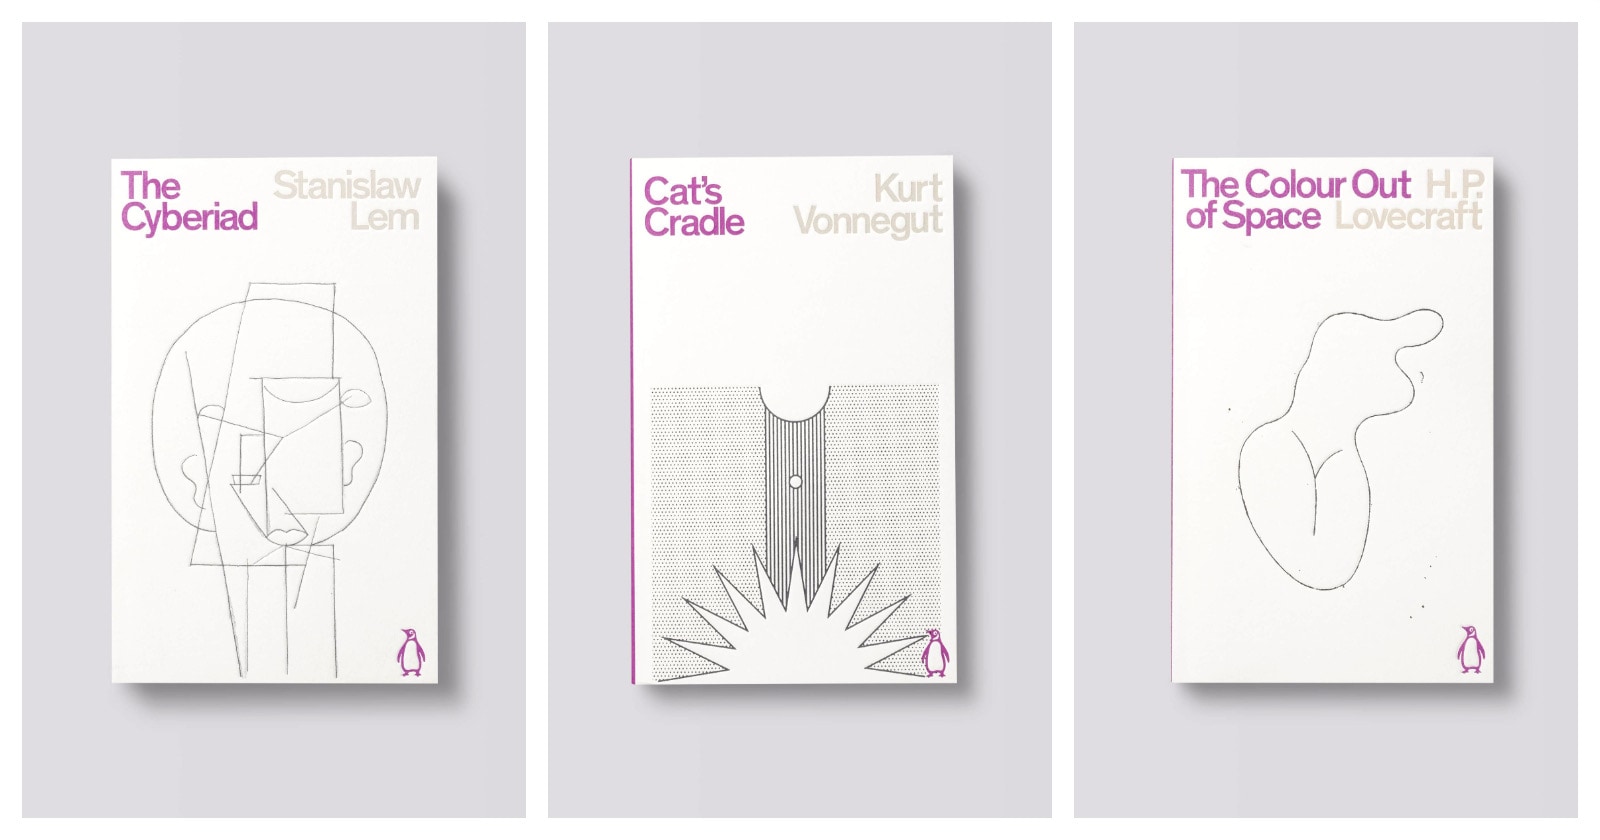 Penguin goes minimalist in a new science fiction collection